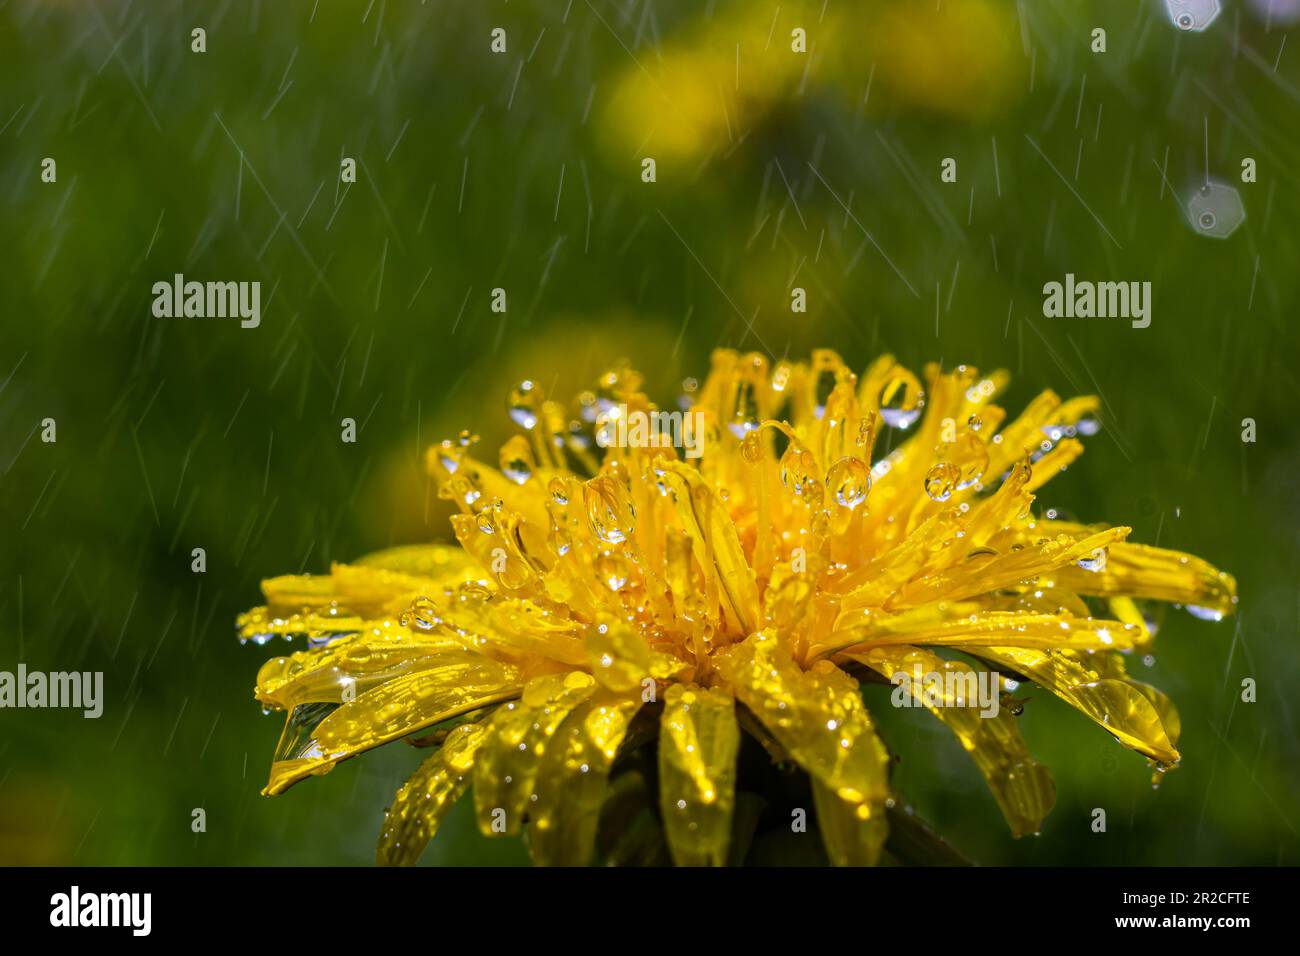 Yellow daisies bloom after the rain and the pollen grains are covered with water droplets. Stock Photo